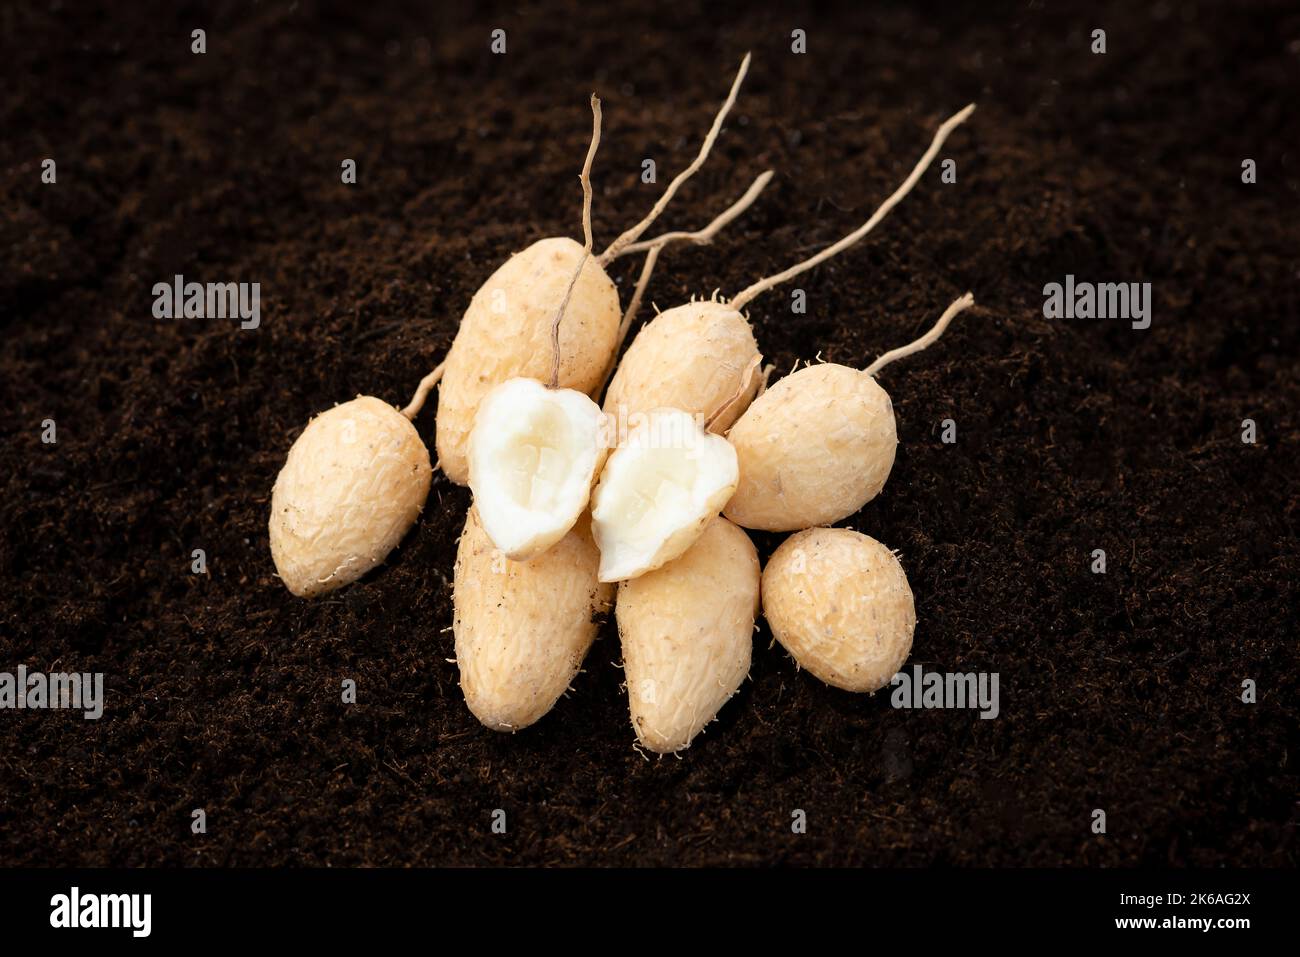 Arrowroot Topi tambo leren marantaceae calathea allouia roots washed cleaned raw uncooked on top rich soil Caribbean crop in Trinidad and Tobago grow Stock Photo